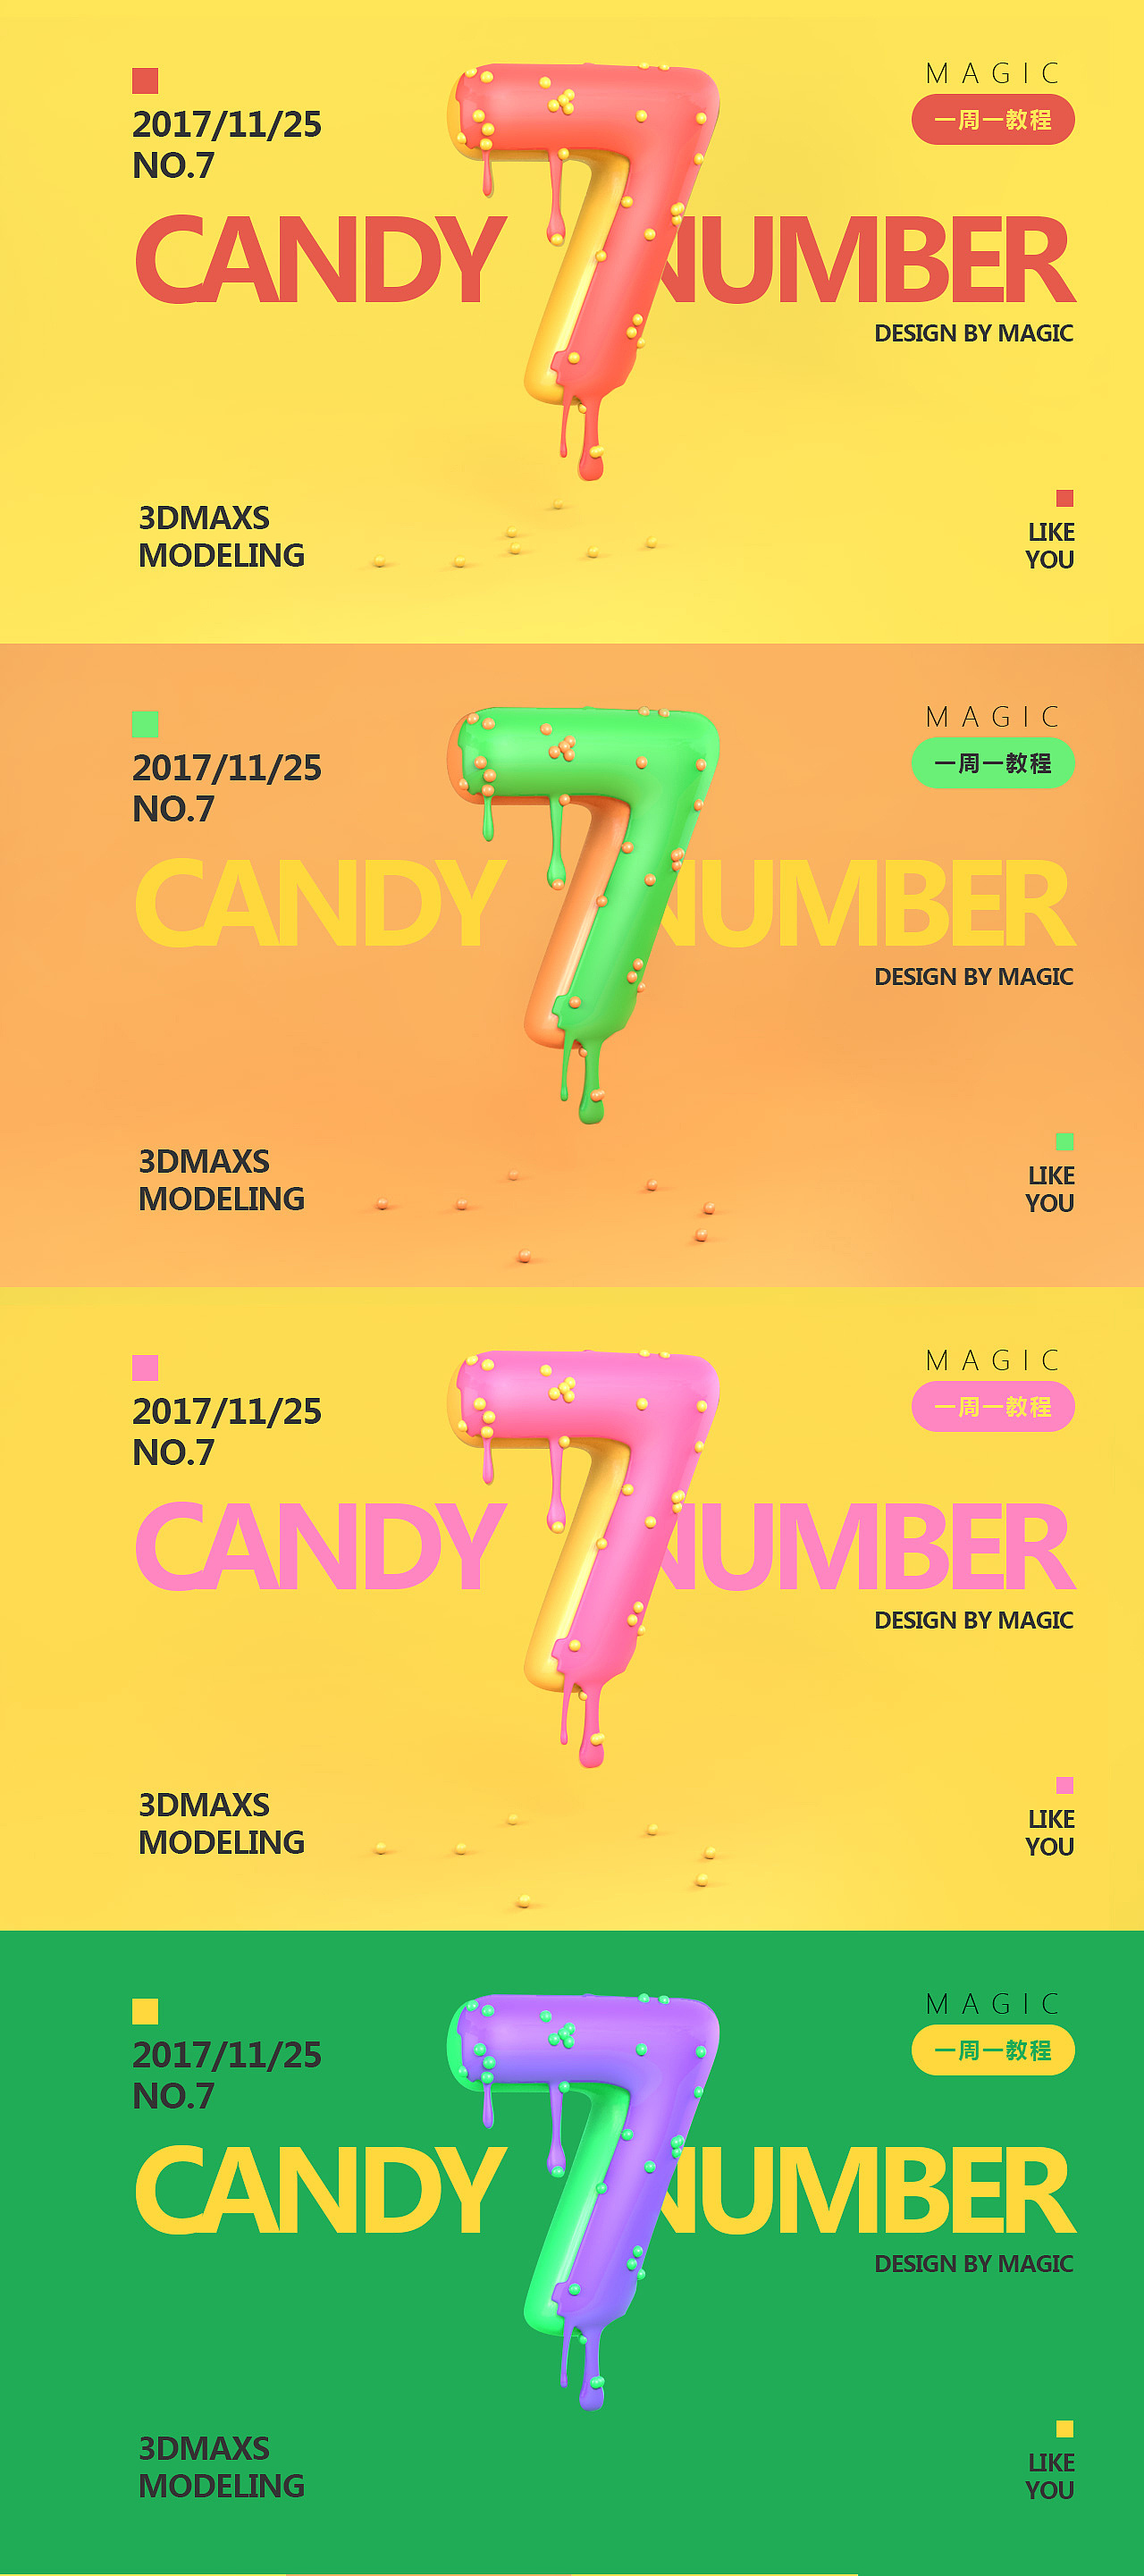 [No. 26] Cinme 4D Candy Font Advanced Modeling and Rendering Tutorial